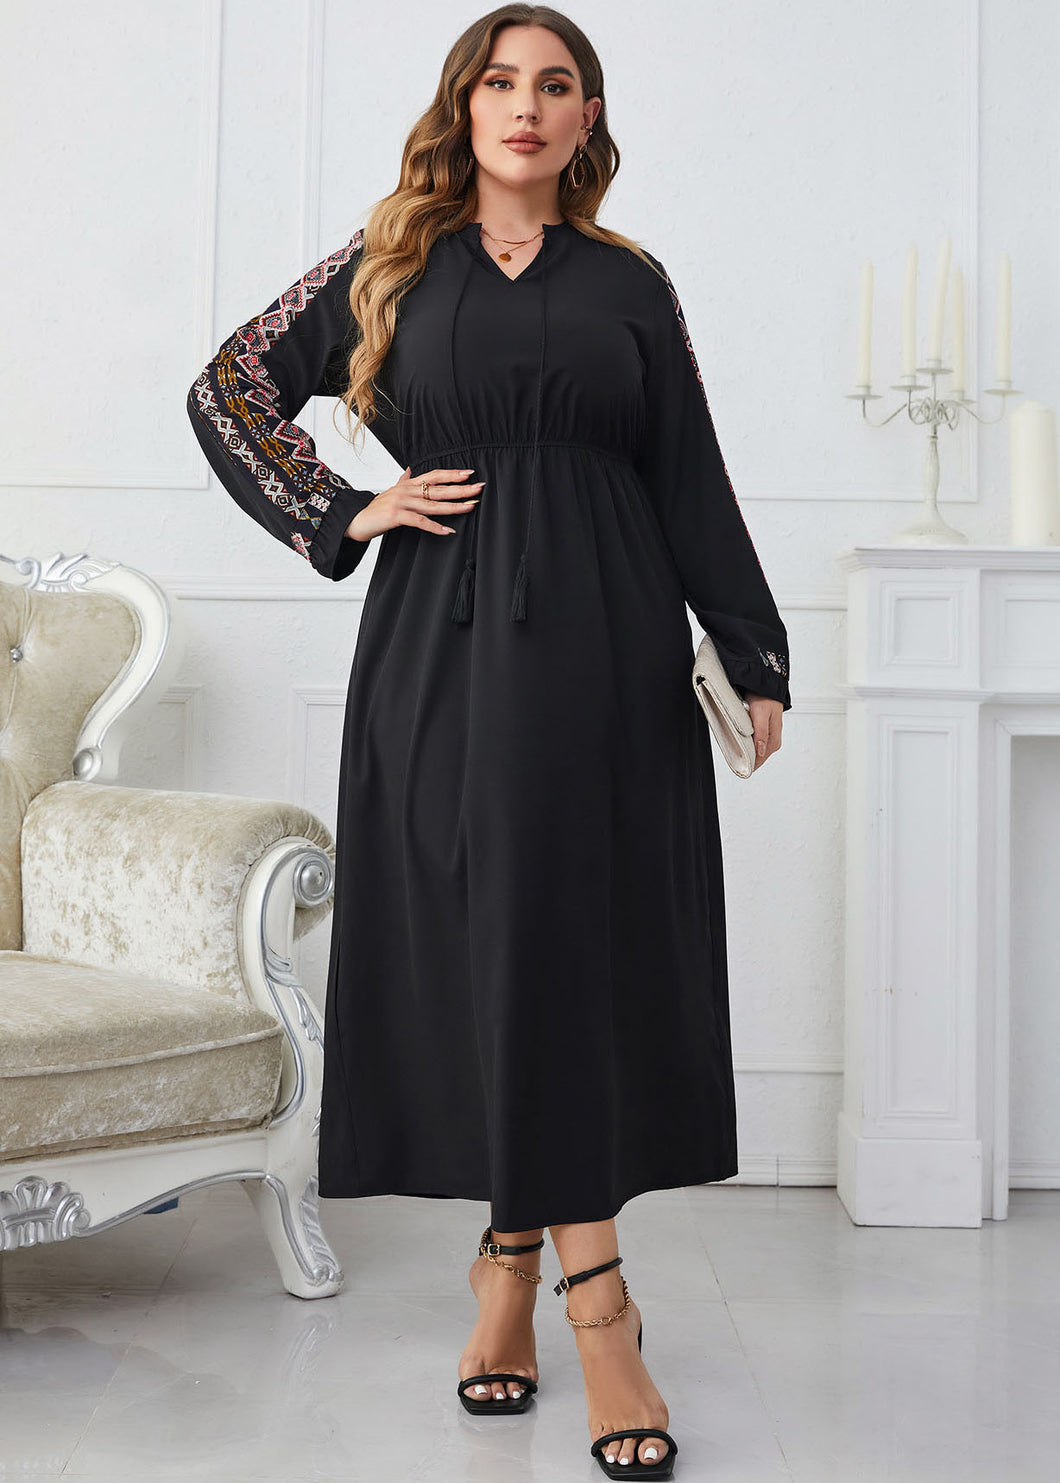 New Black Embroideried Lace Up Wrinkled Patchwork Cotton Long Dresses Fall